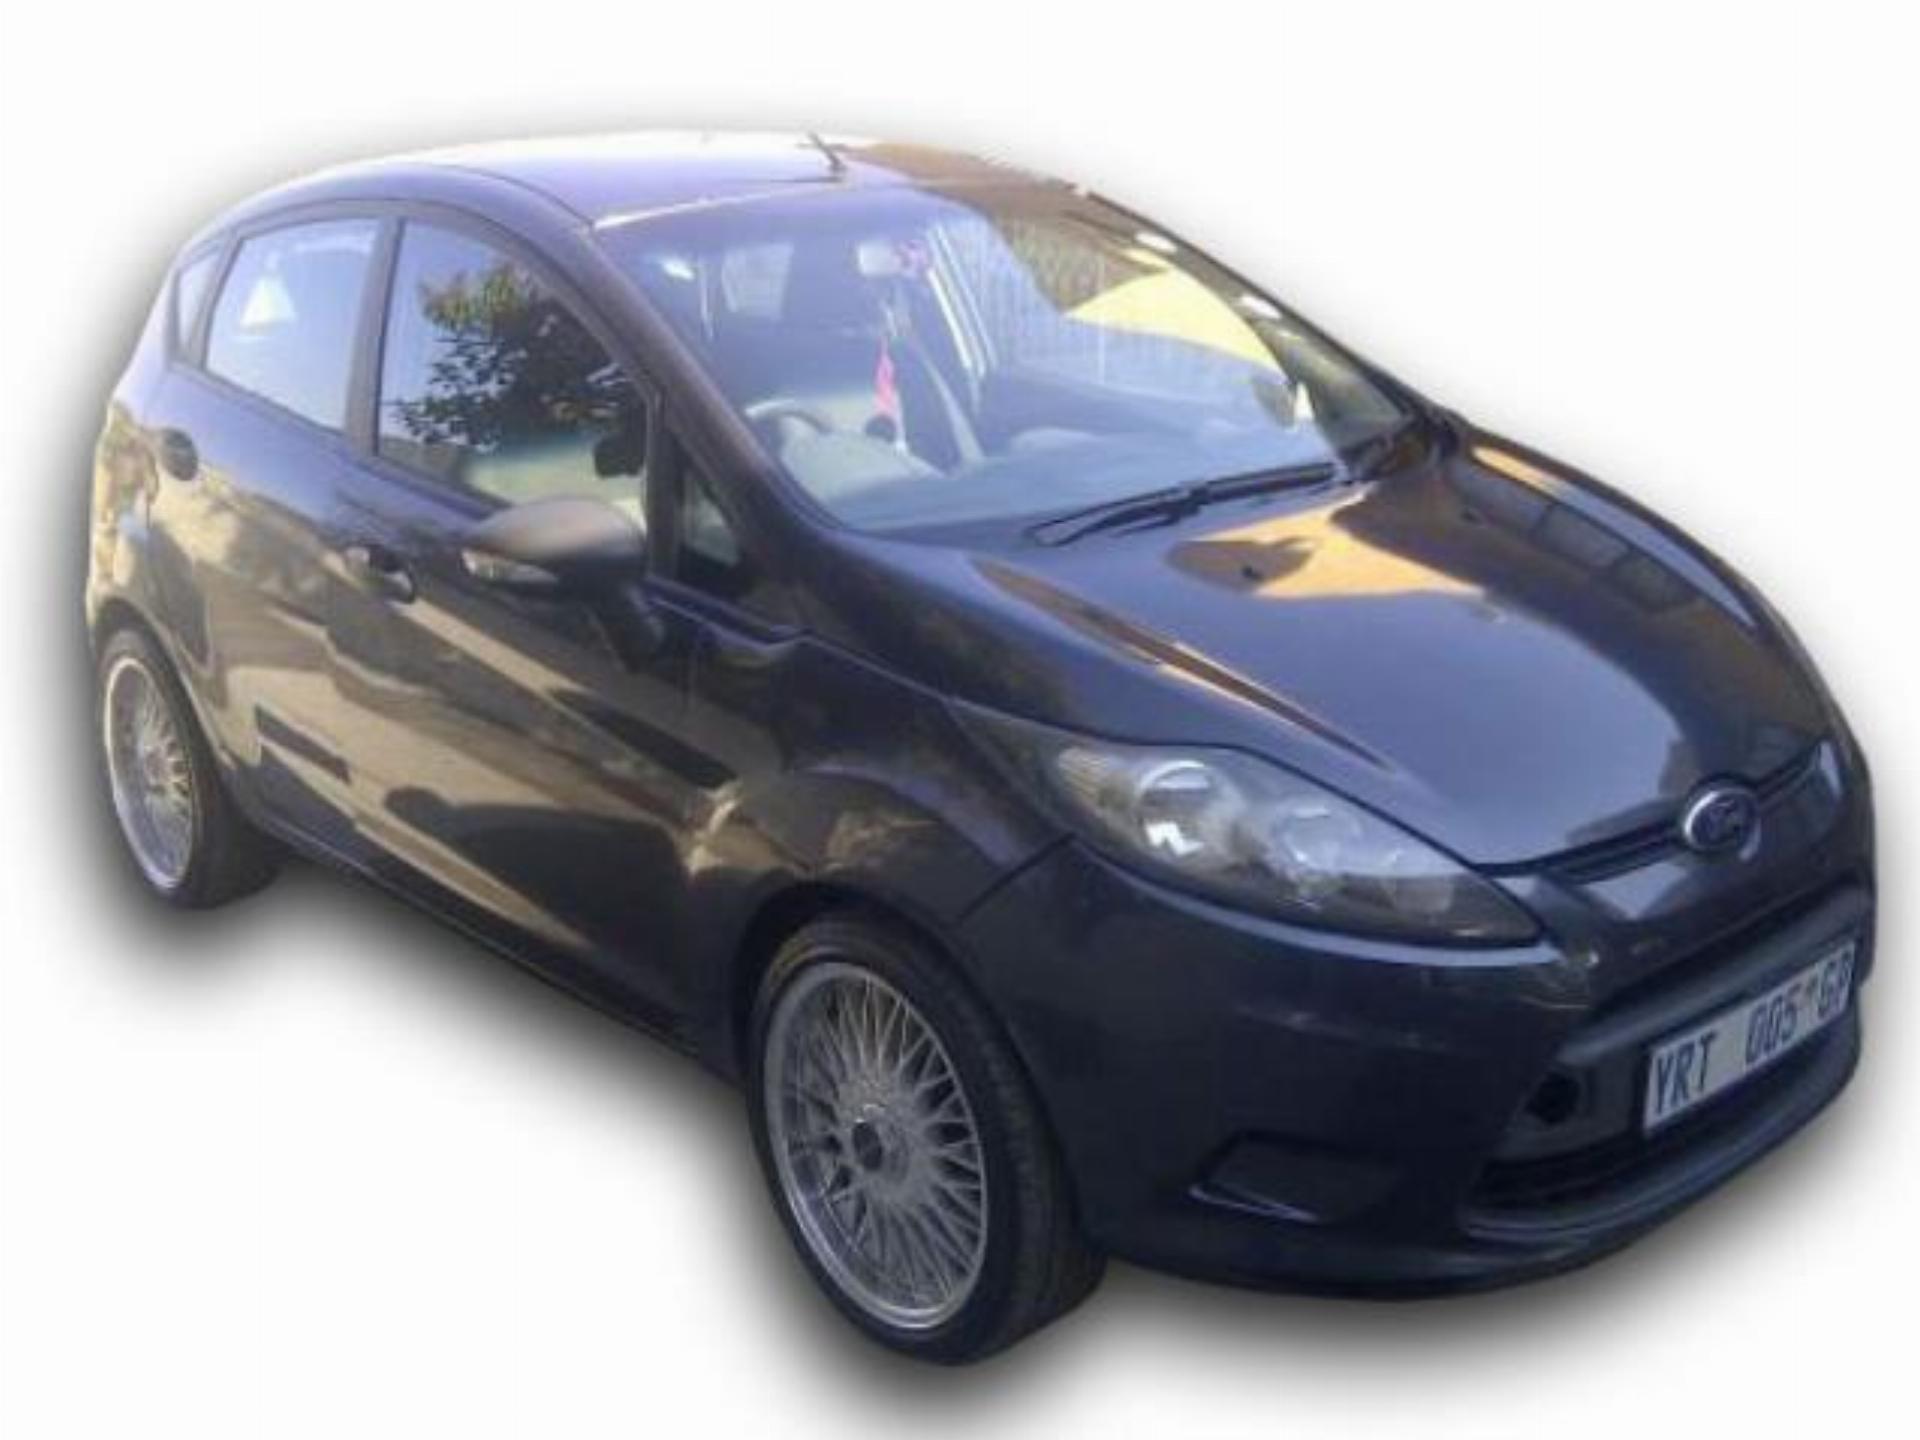 Used Ford Fiesta 1.6 Tdci Ambient 2009 on auction PV1006136